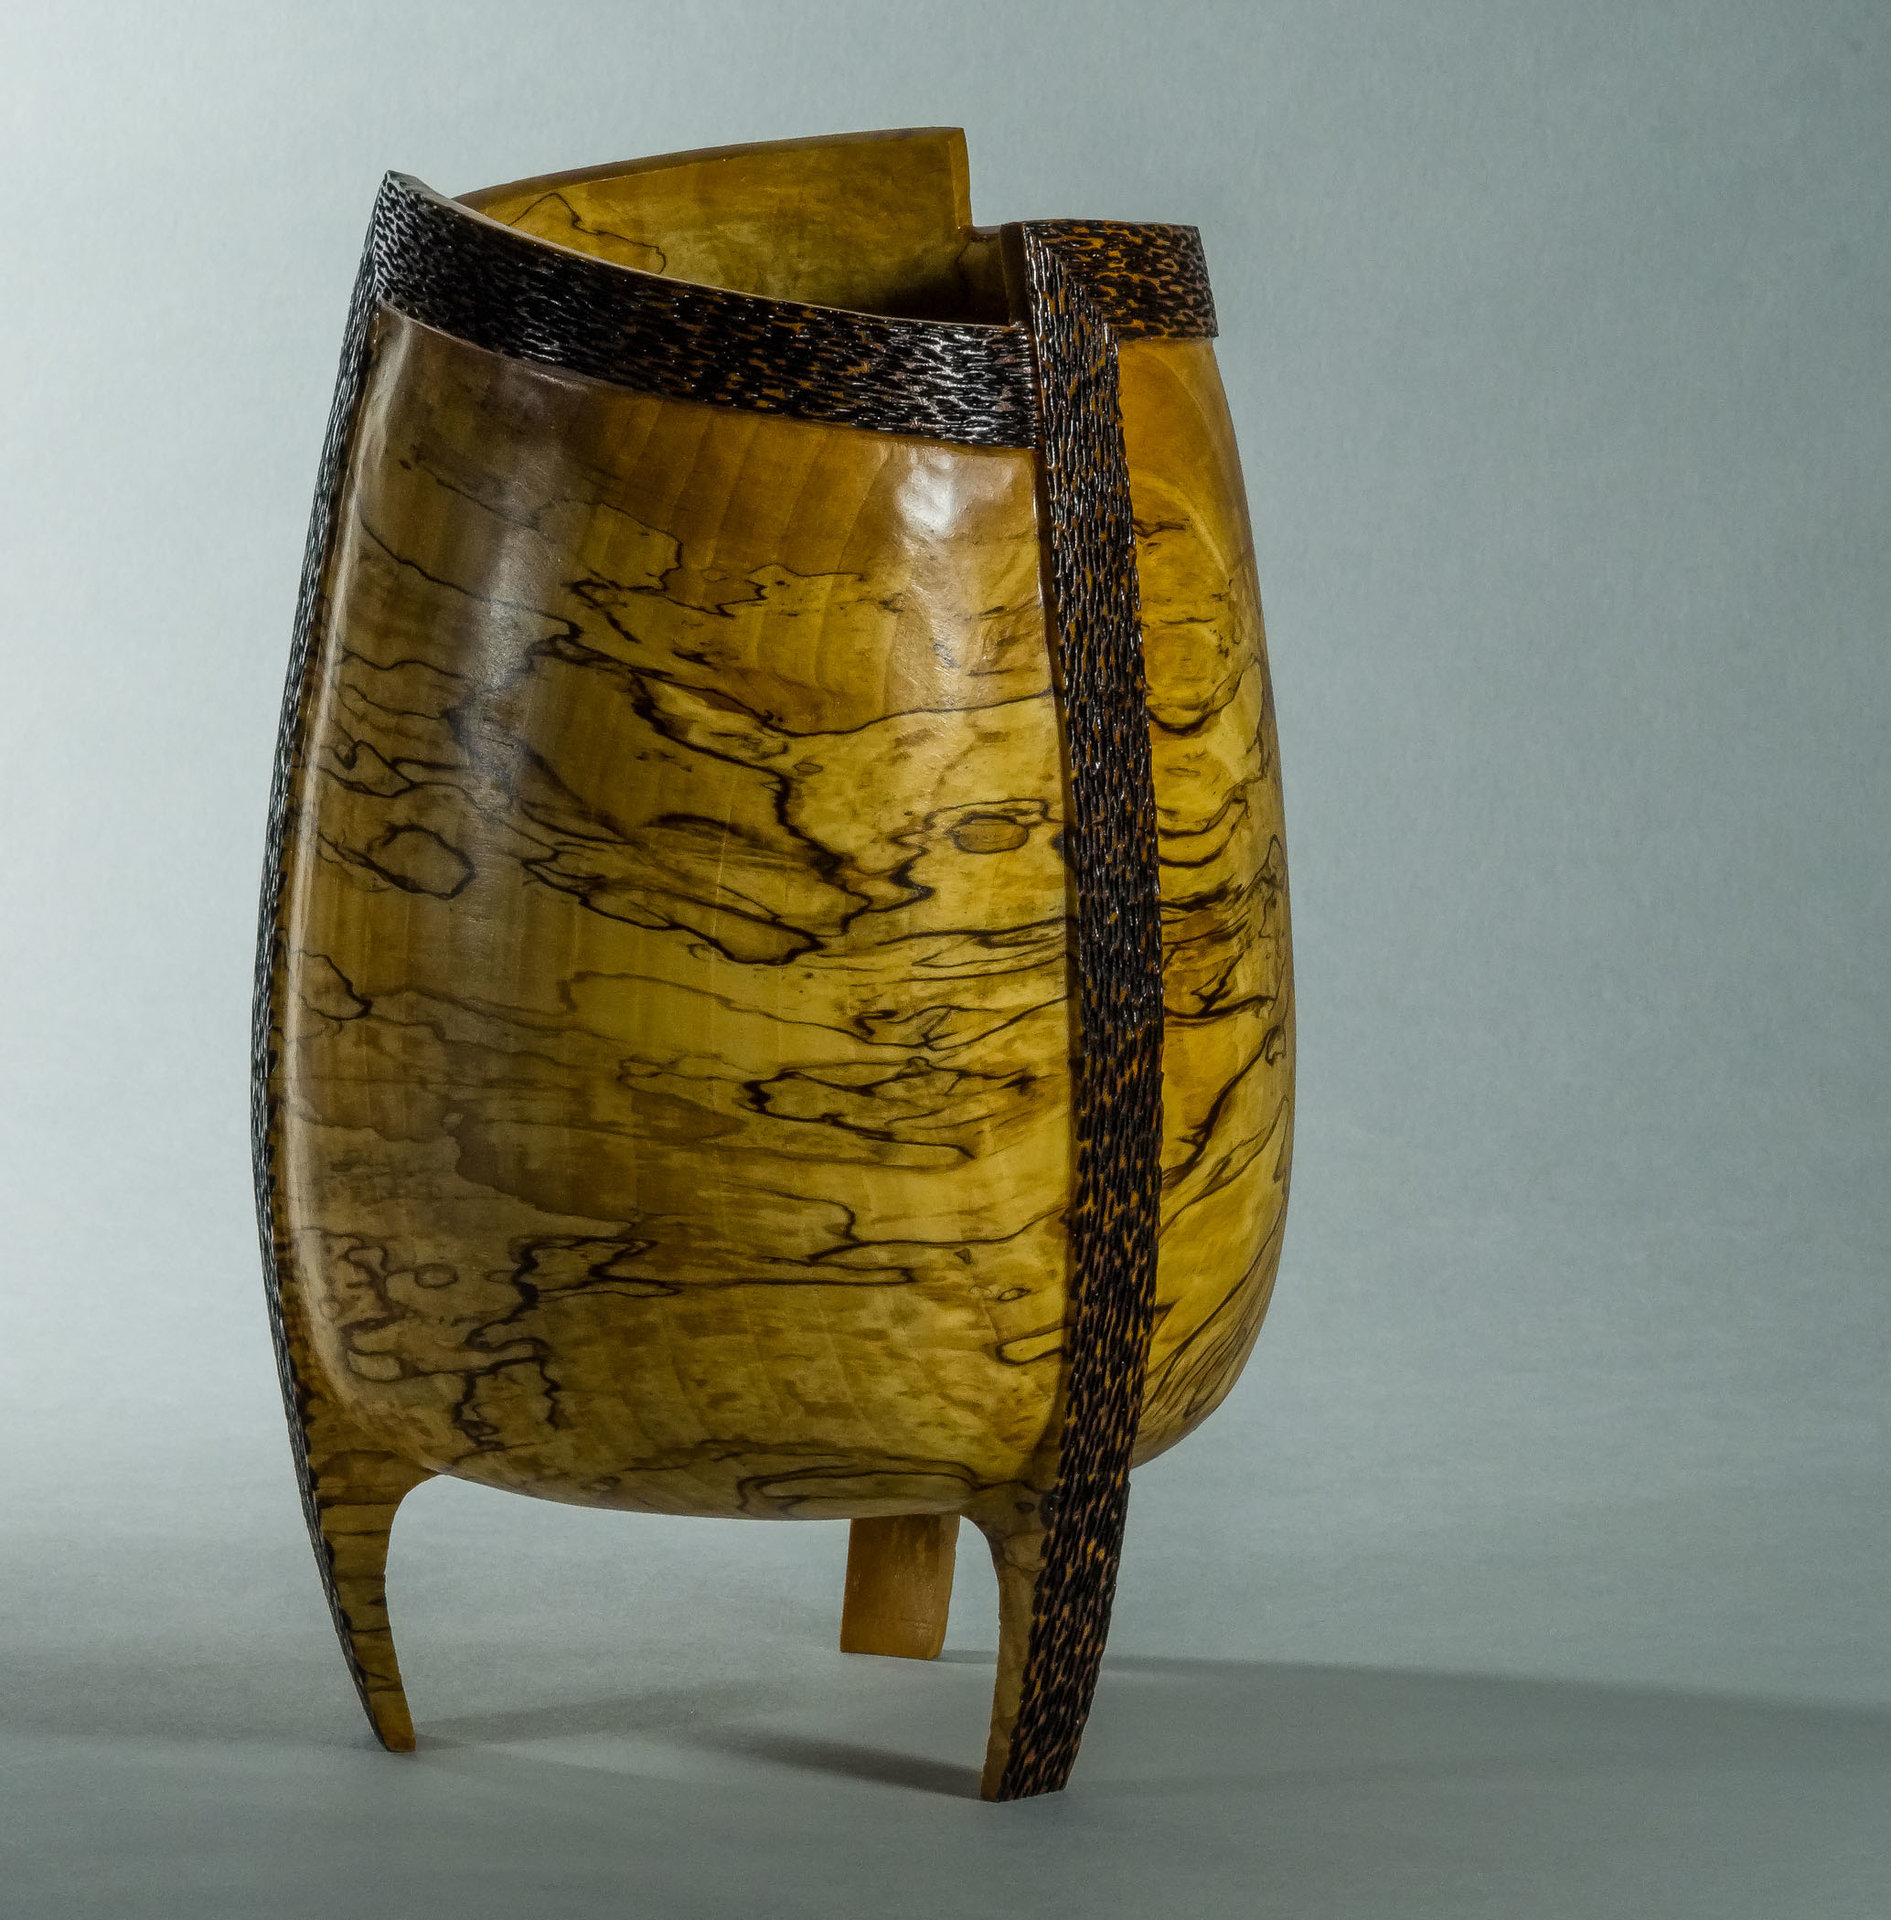 Spalted Beech Footed Vessel